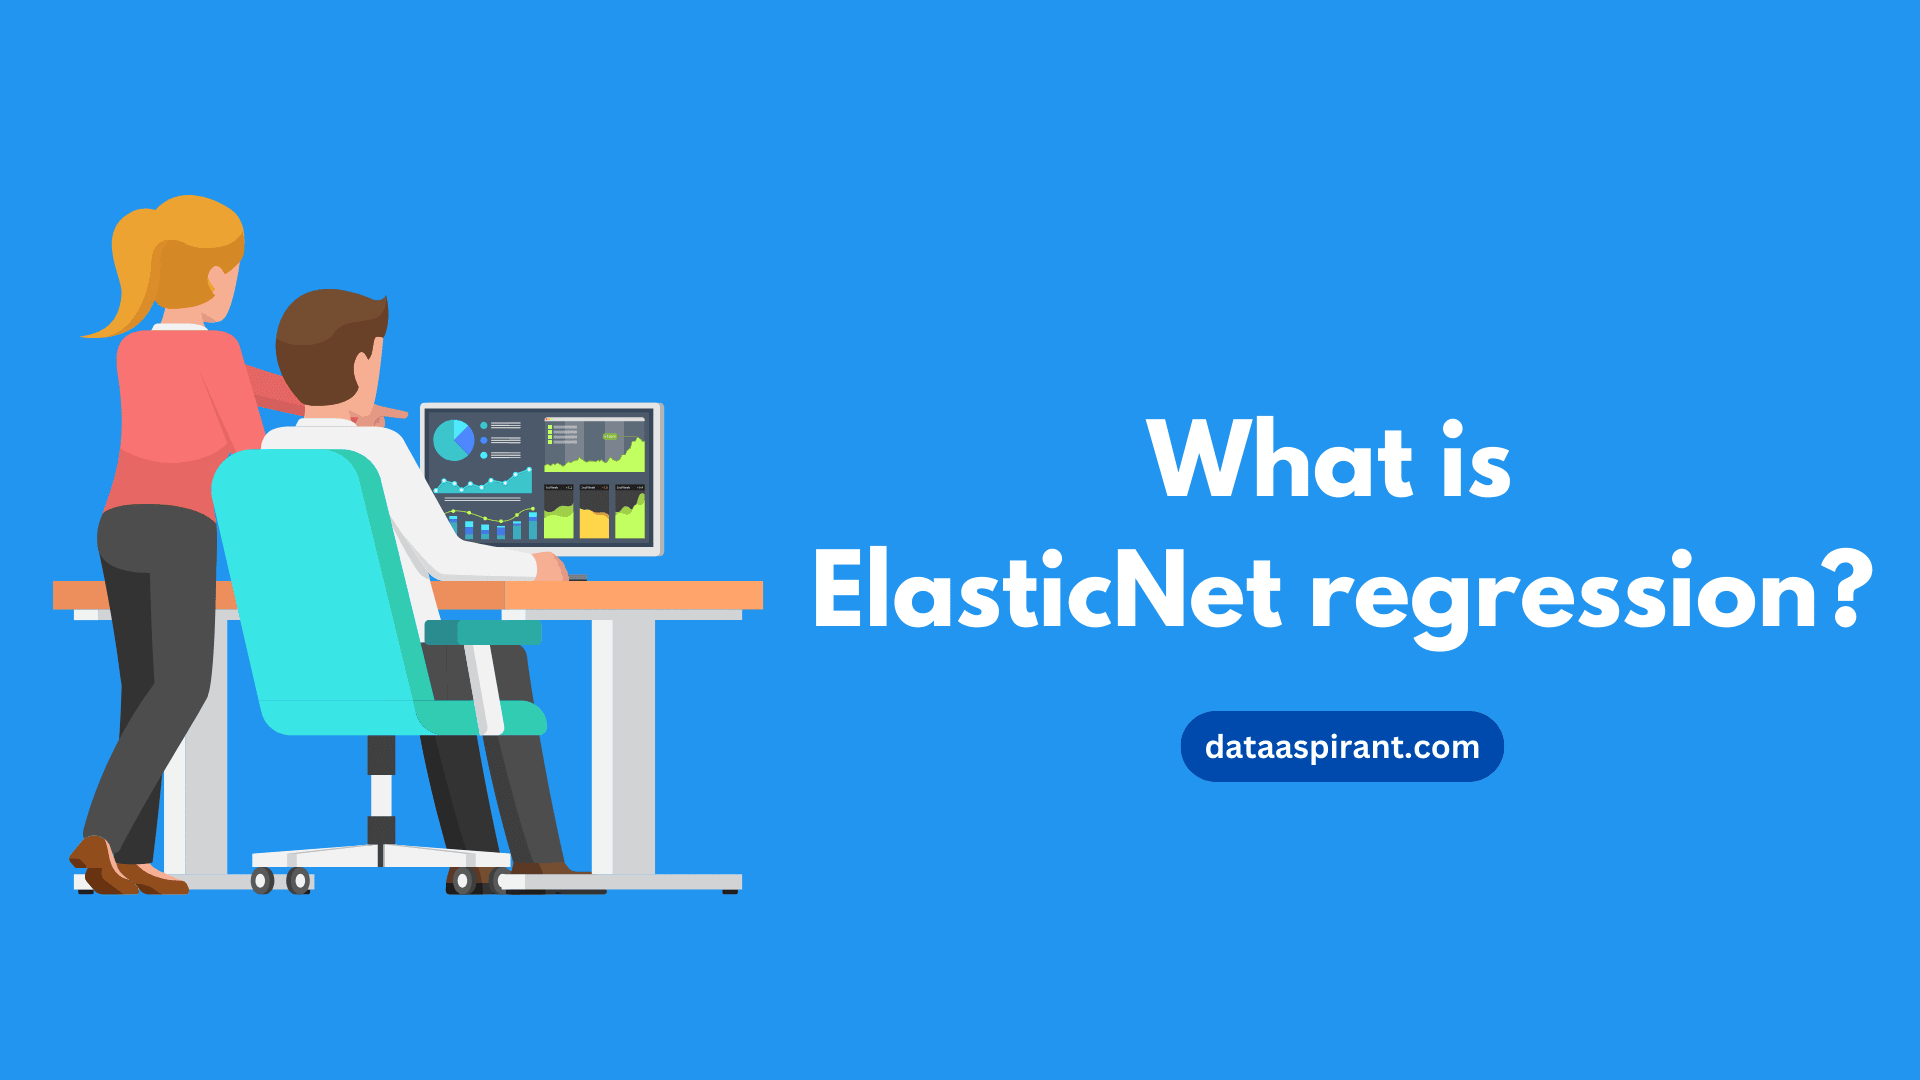 Introduction to ElasticNet Regression